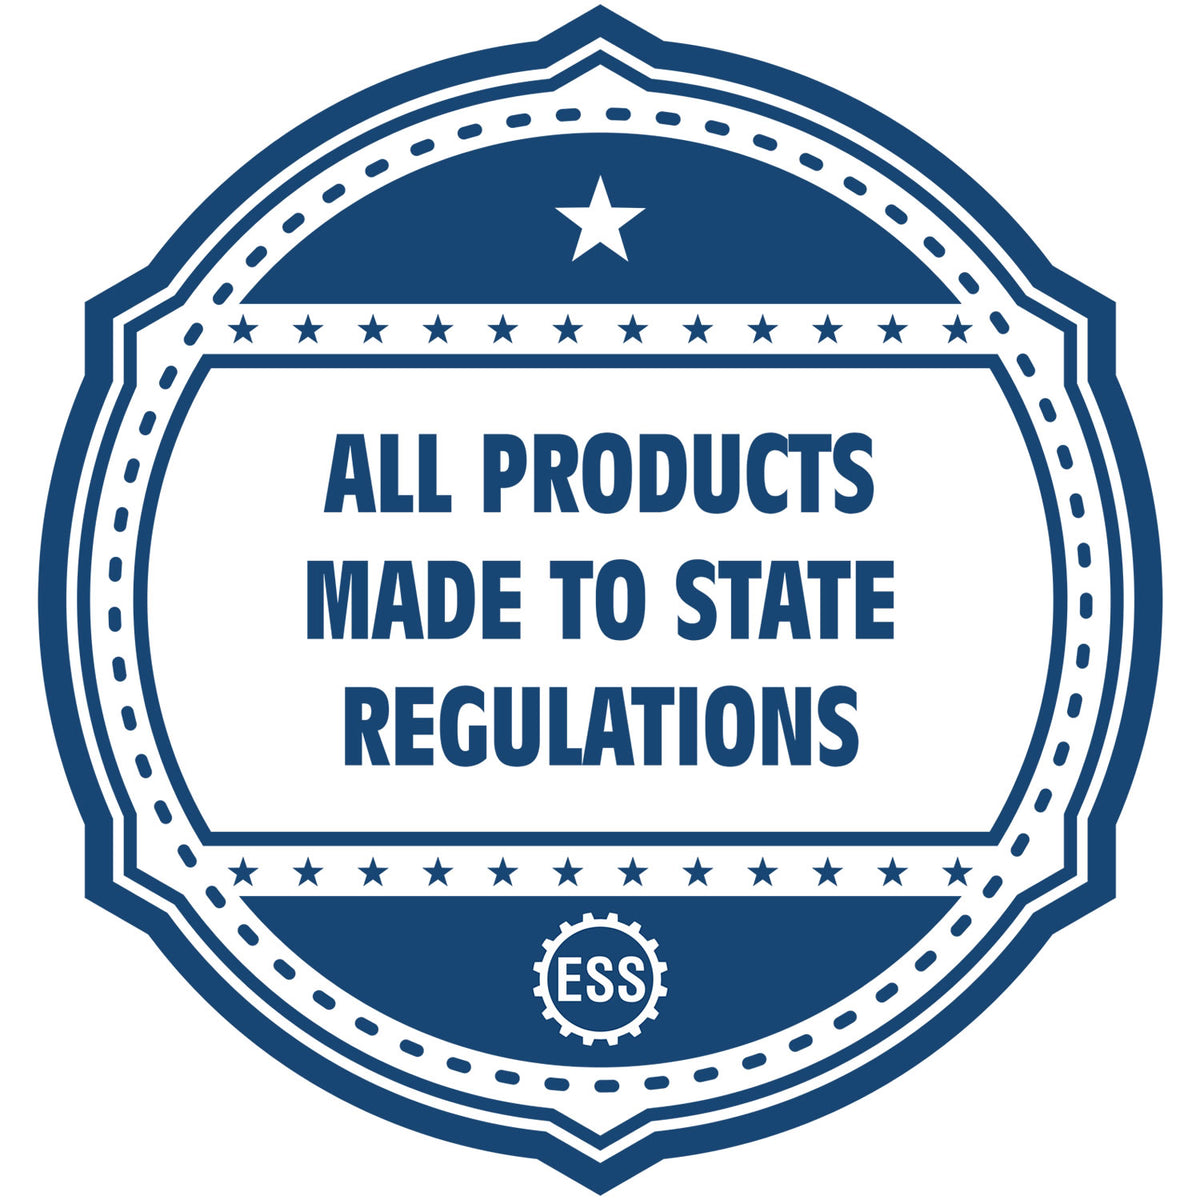 A blue icon or badge for the Gift Louisiana Engineer Seal showing that this product is made in compliance with state regulations.